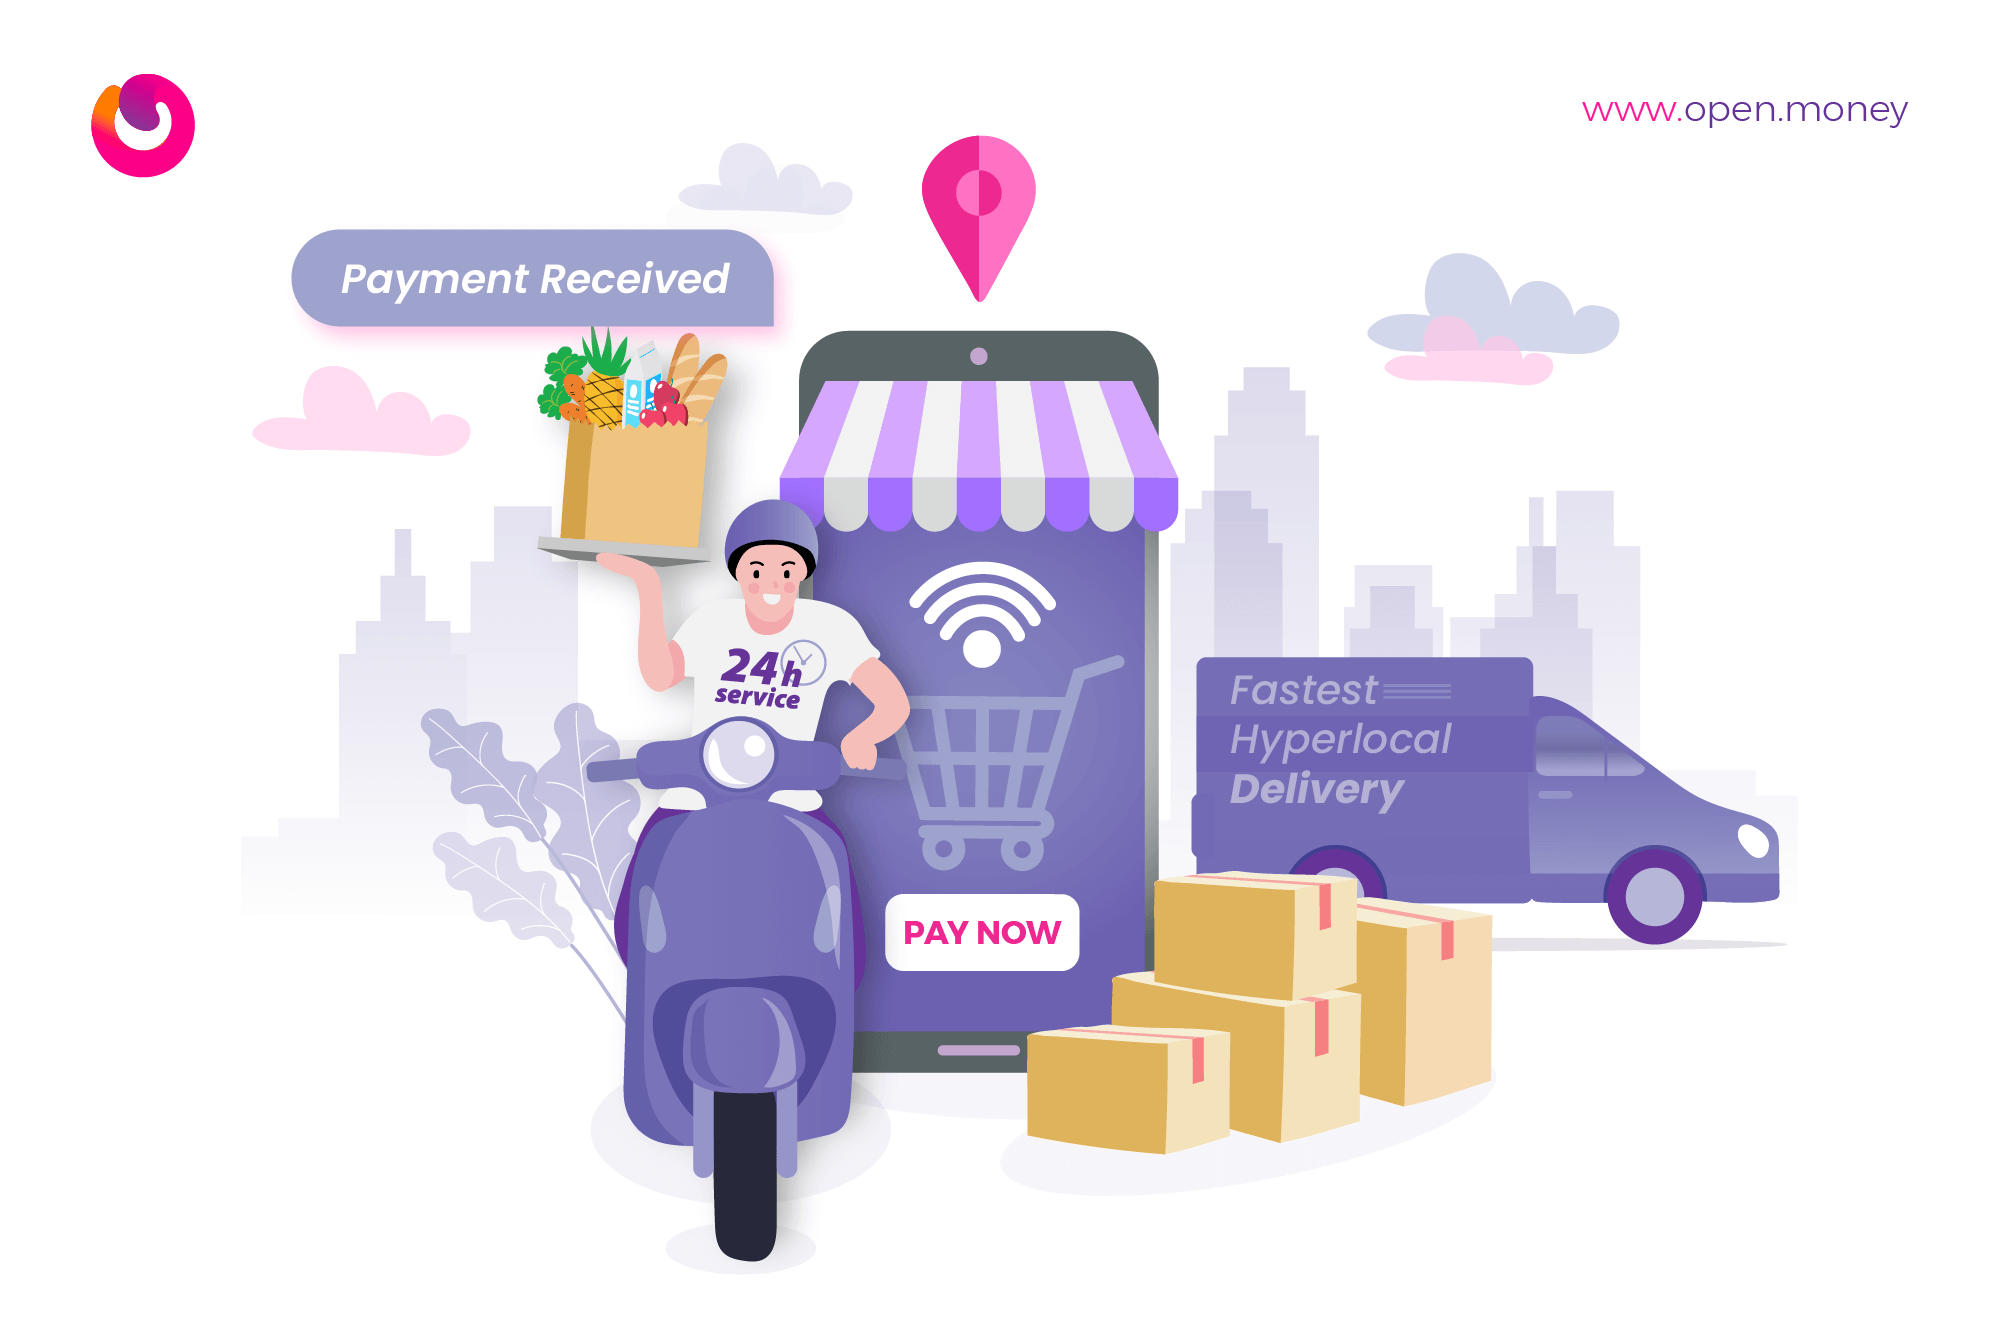 Streamline business & finances for your hyperlocal delivery business